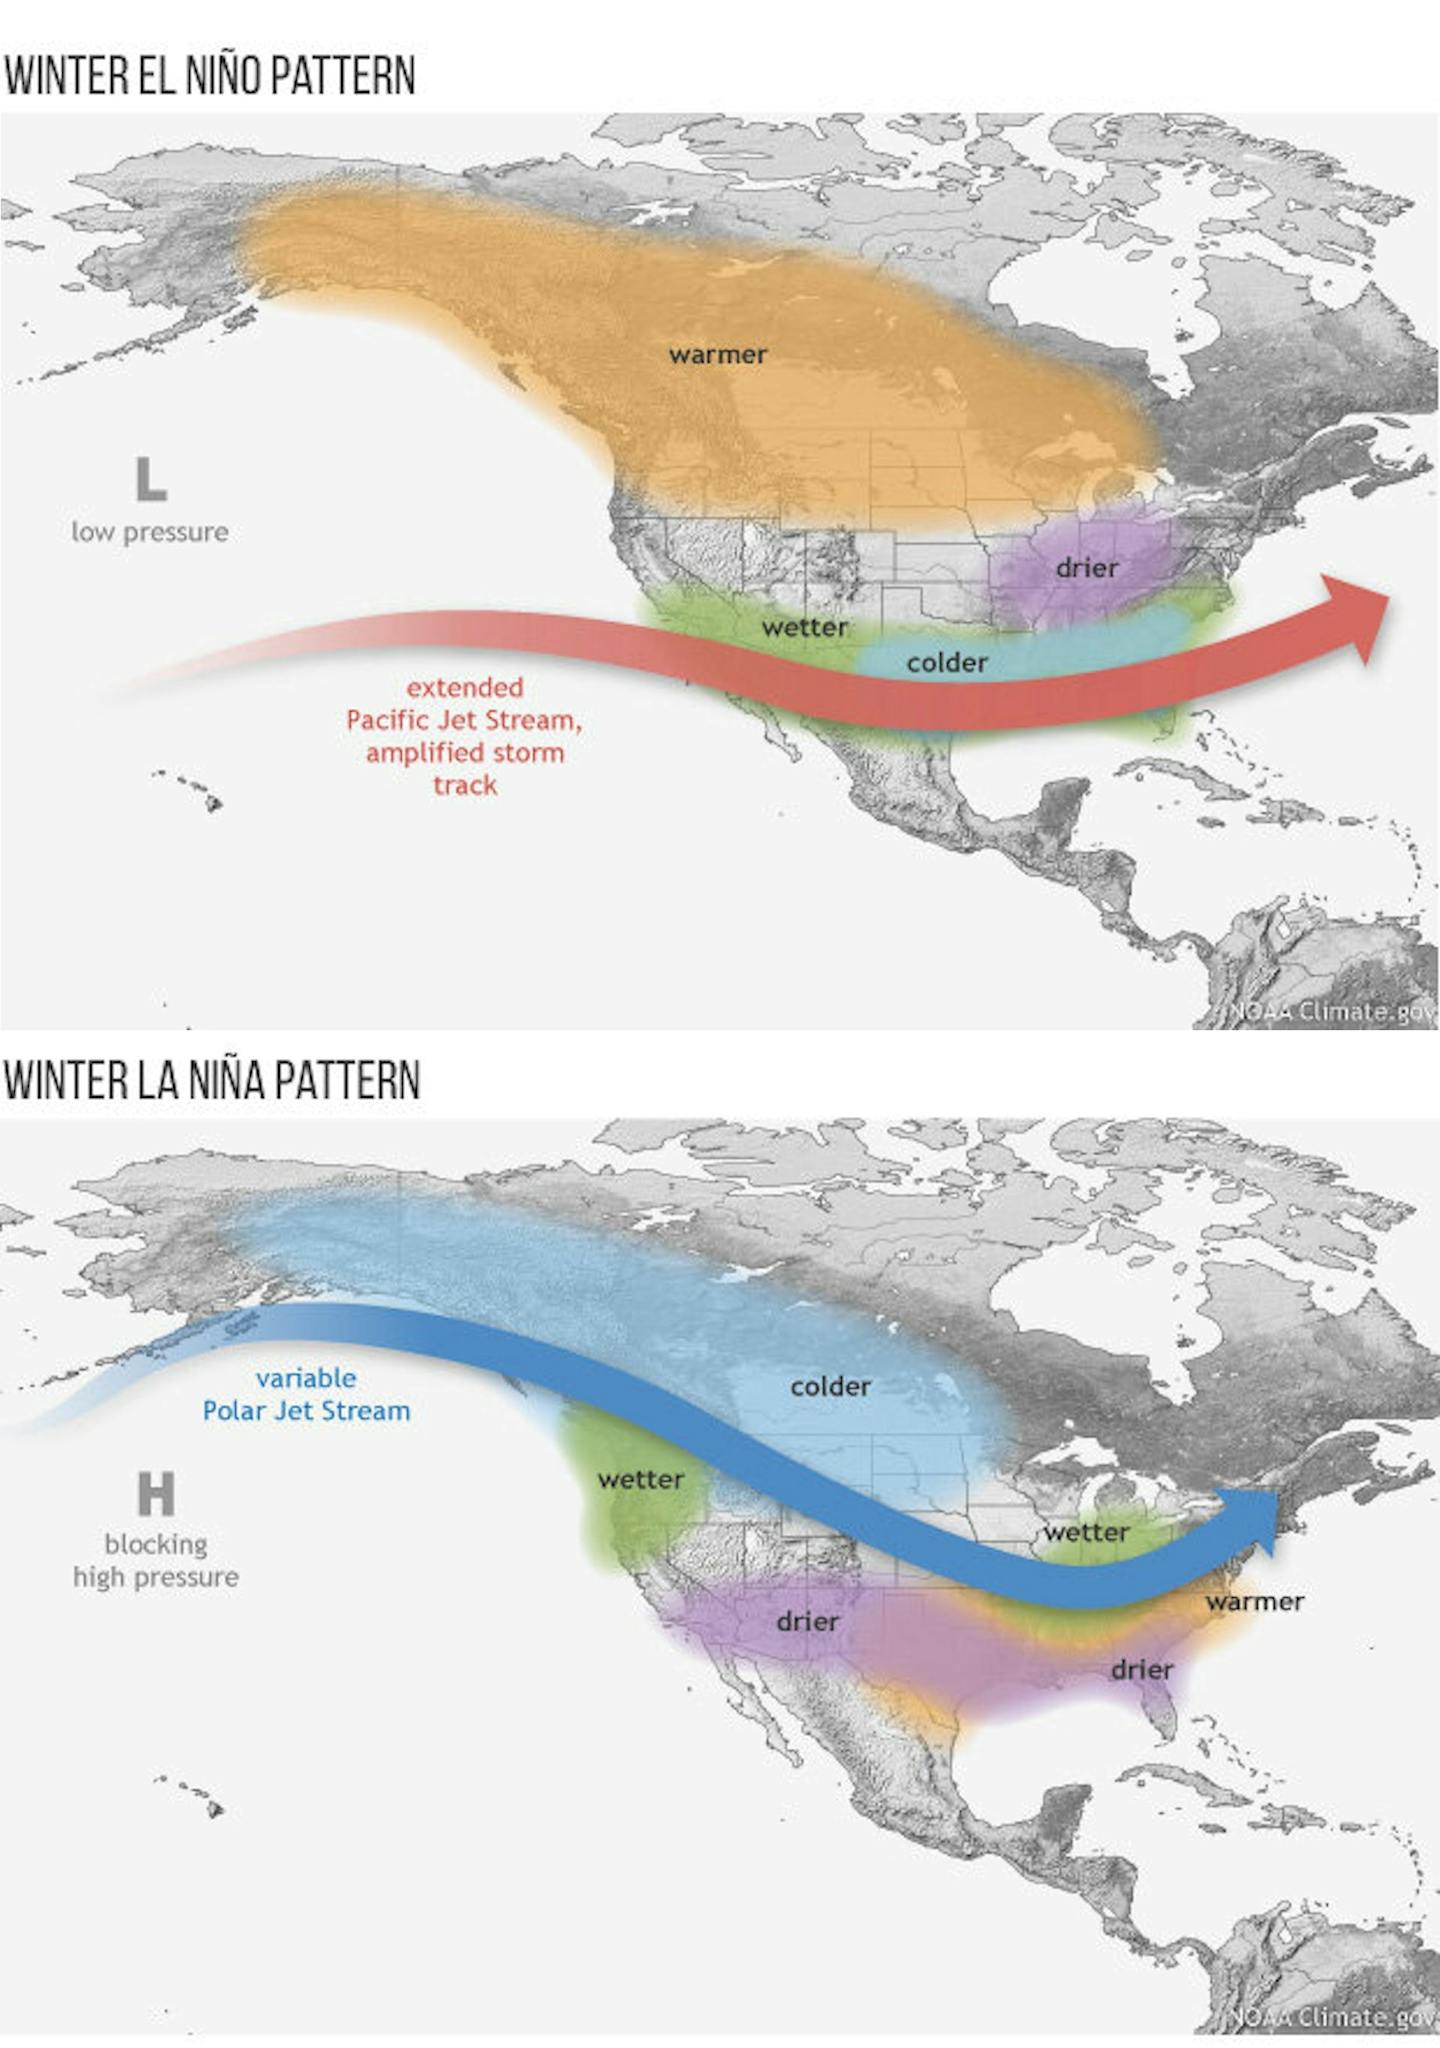 Two maps of typical winter conditions under El Nino and La Nina show the Southwest wetter and the Northwest and upper Midwest generally warmer under El Nino.